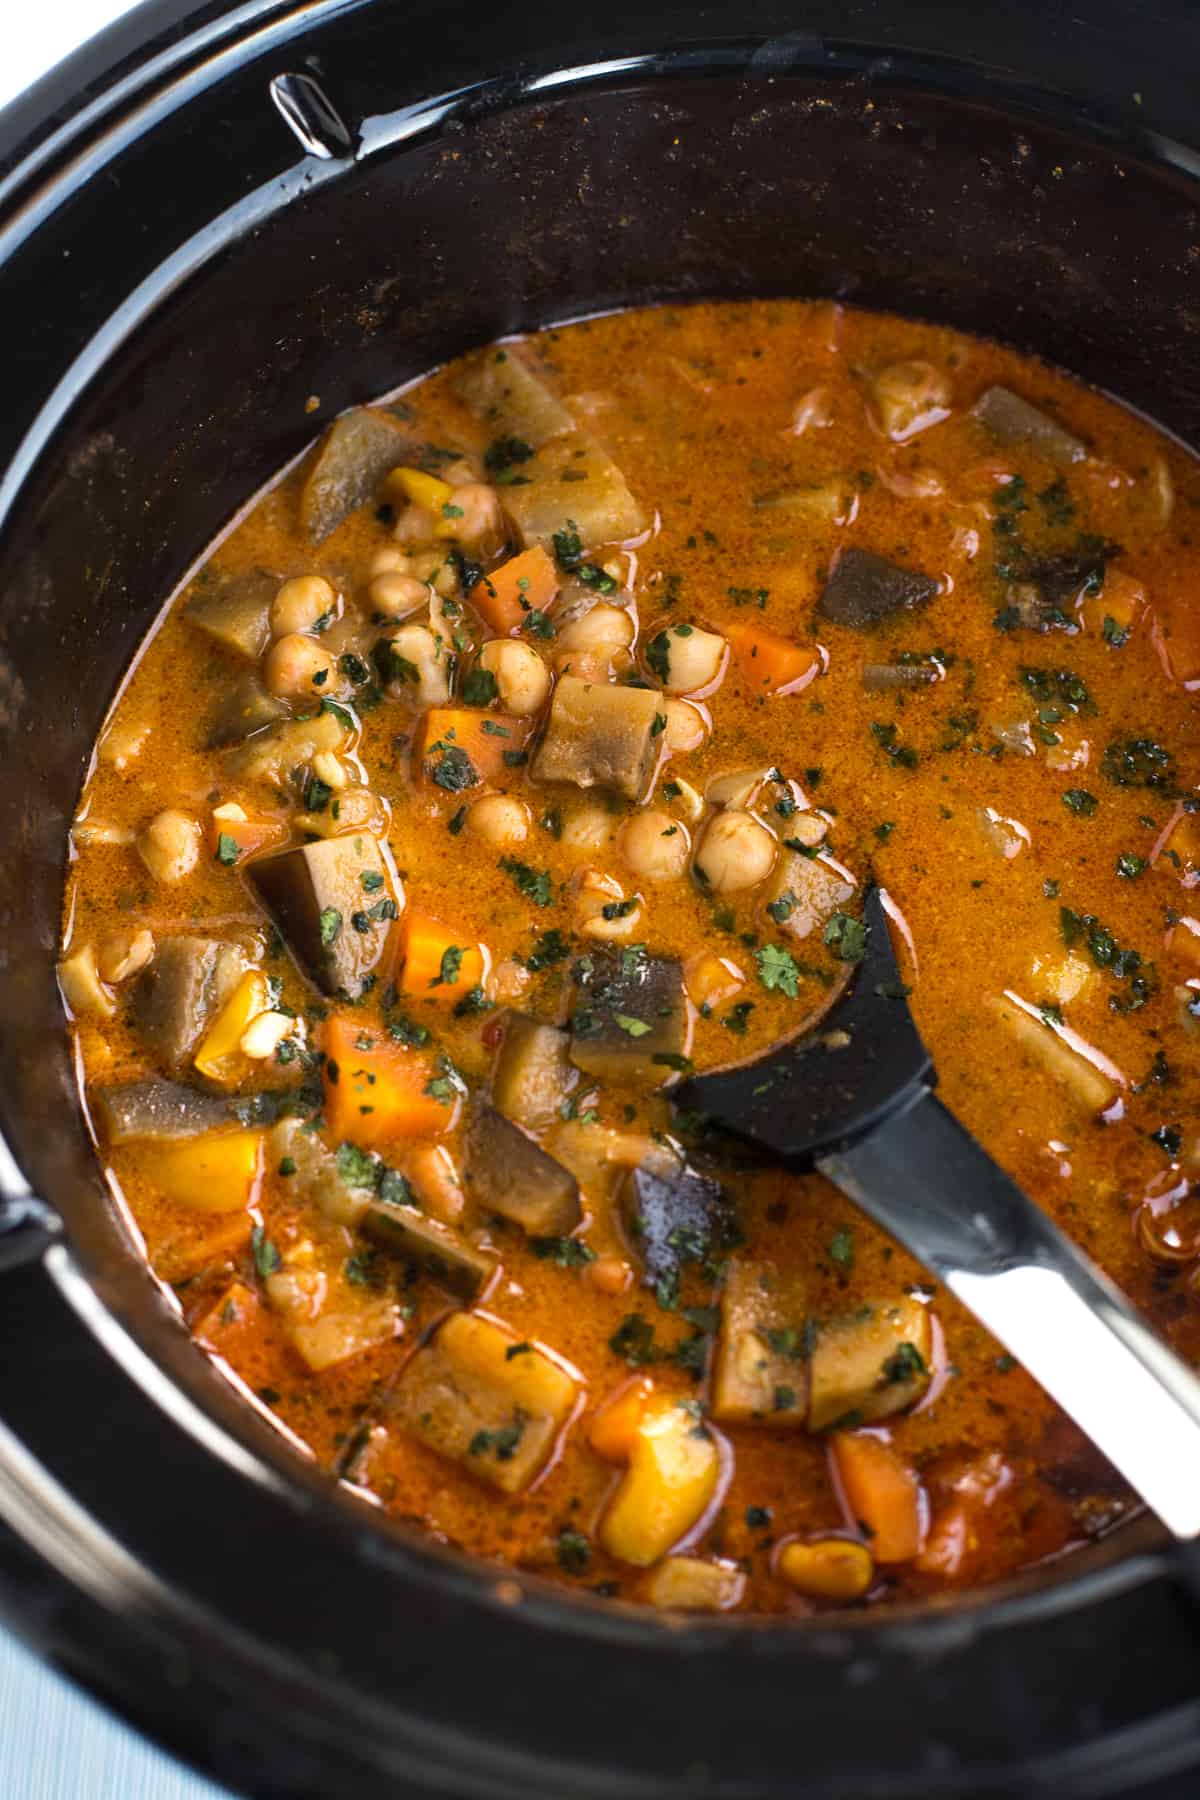 A vegetable and chickpea curry in the slow cooker.